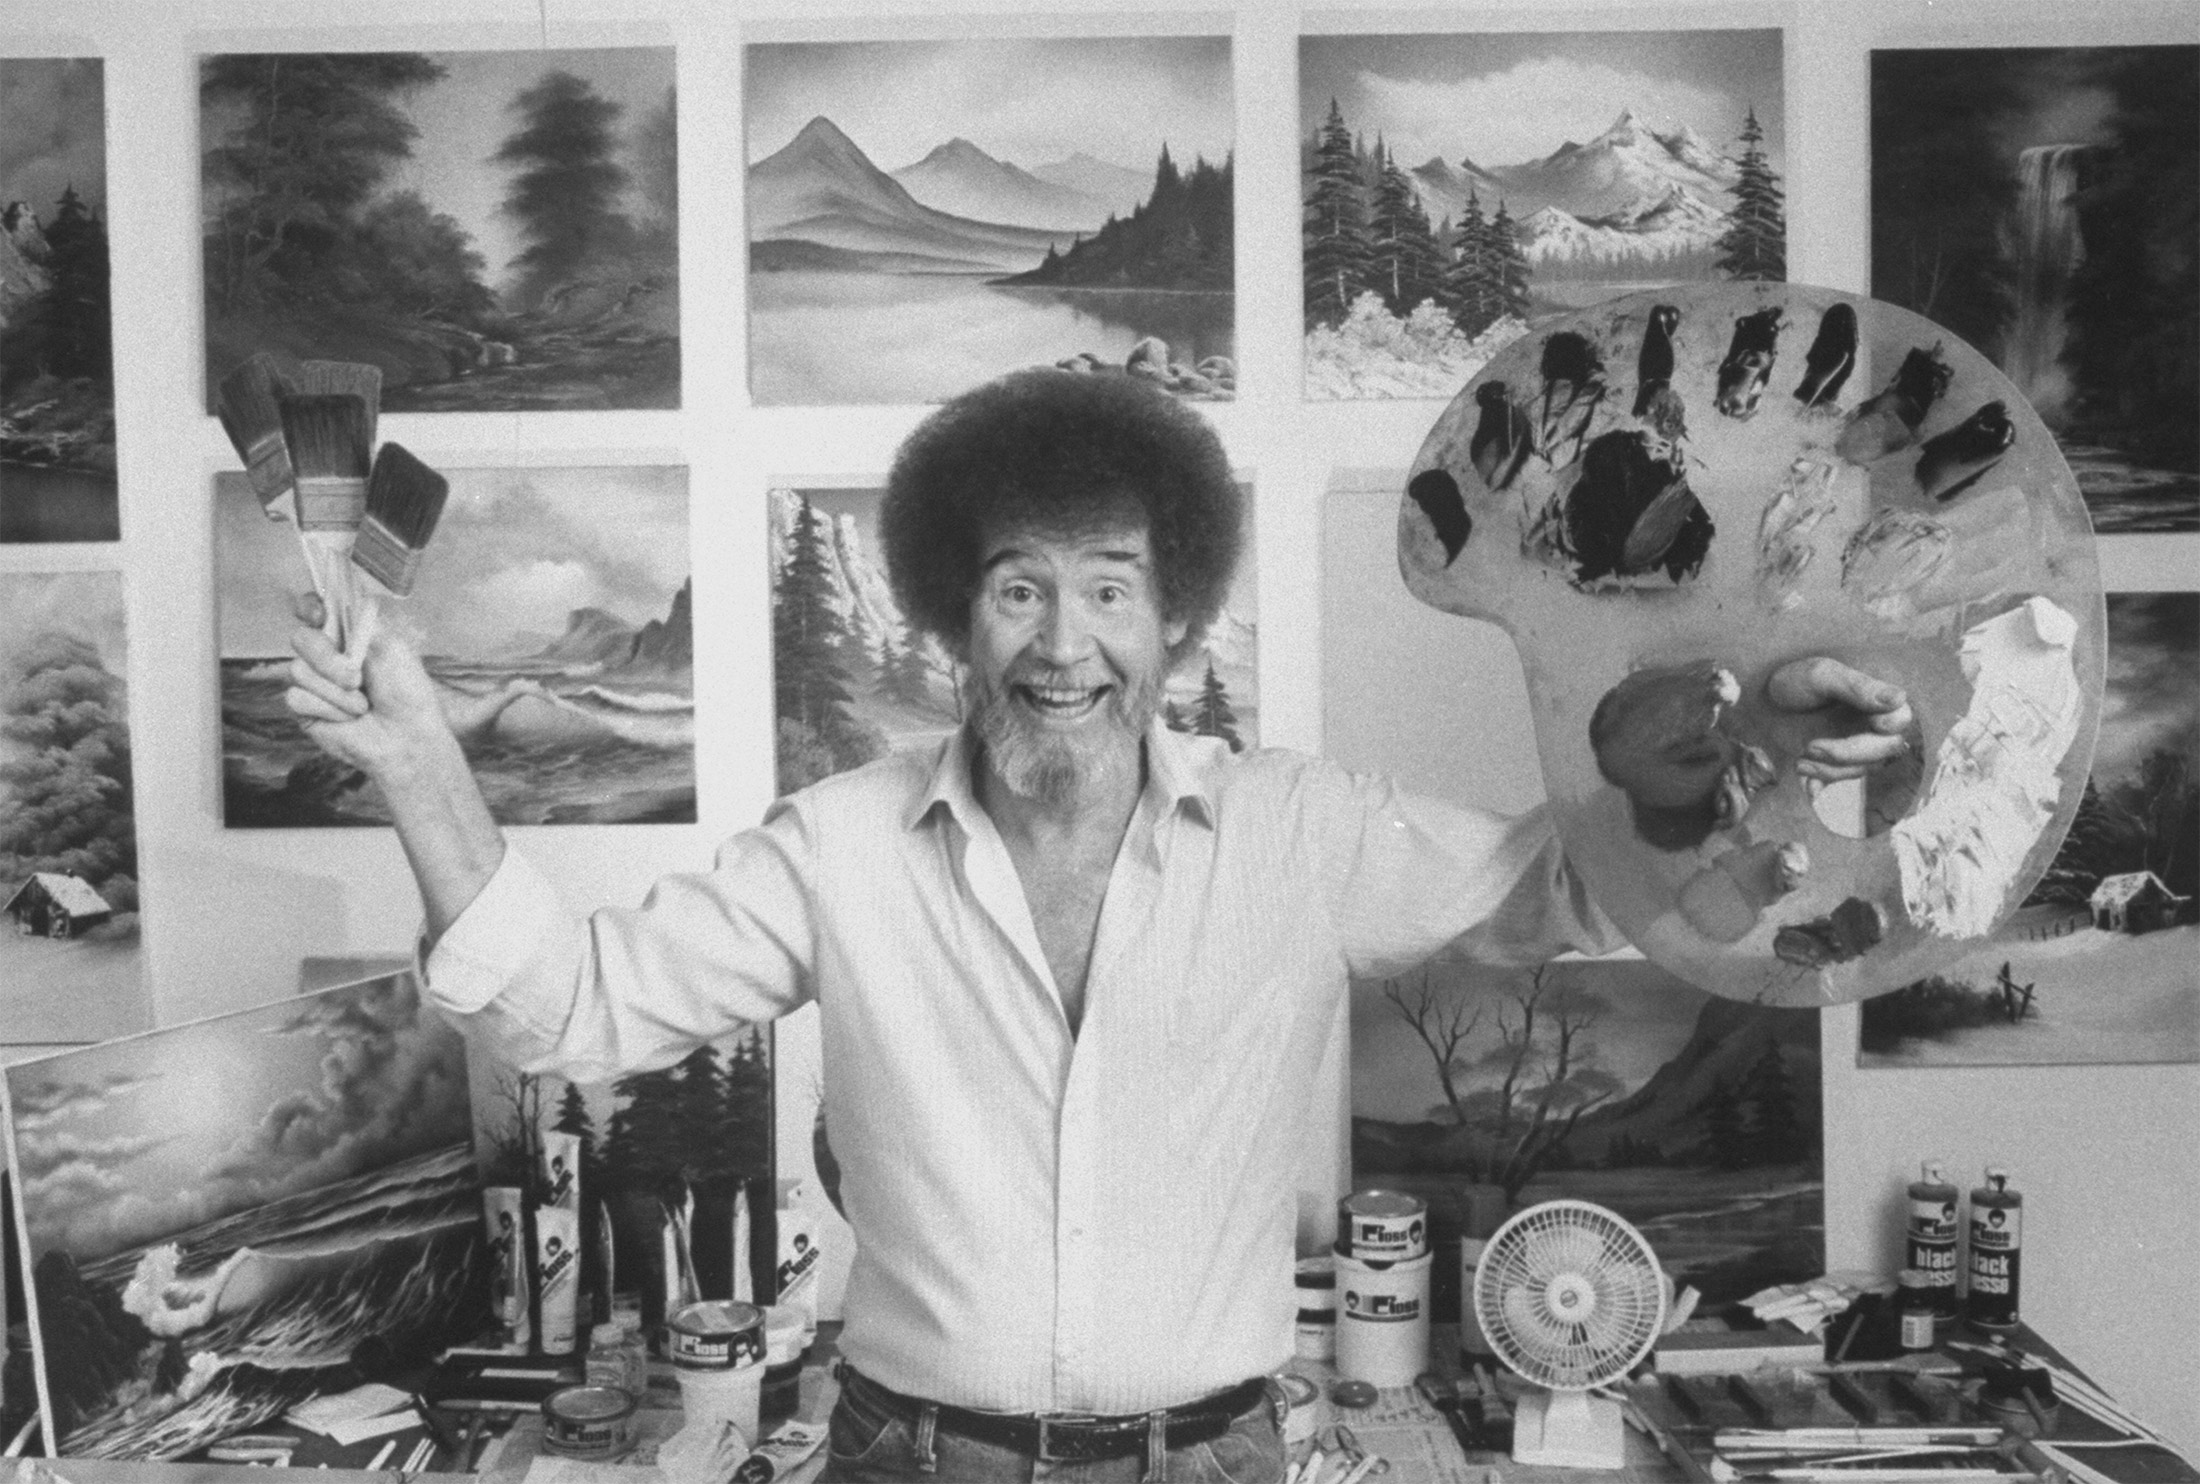 Bob Ross’ Company Settles Suit Over ‘Beautiful Mountain’ Shirt Bloomberg